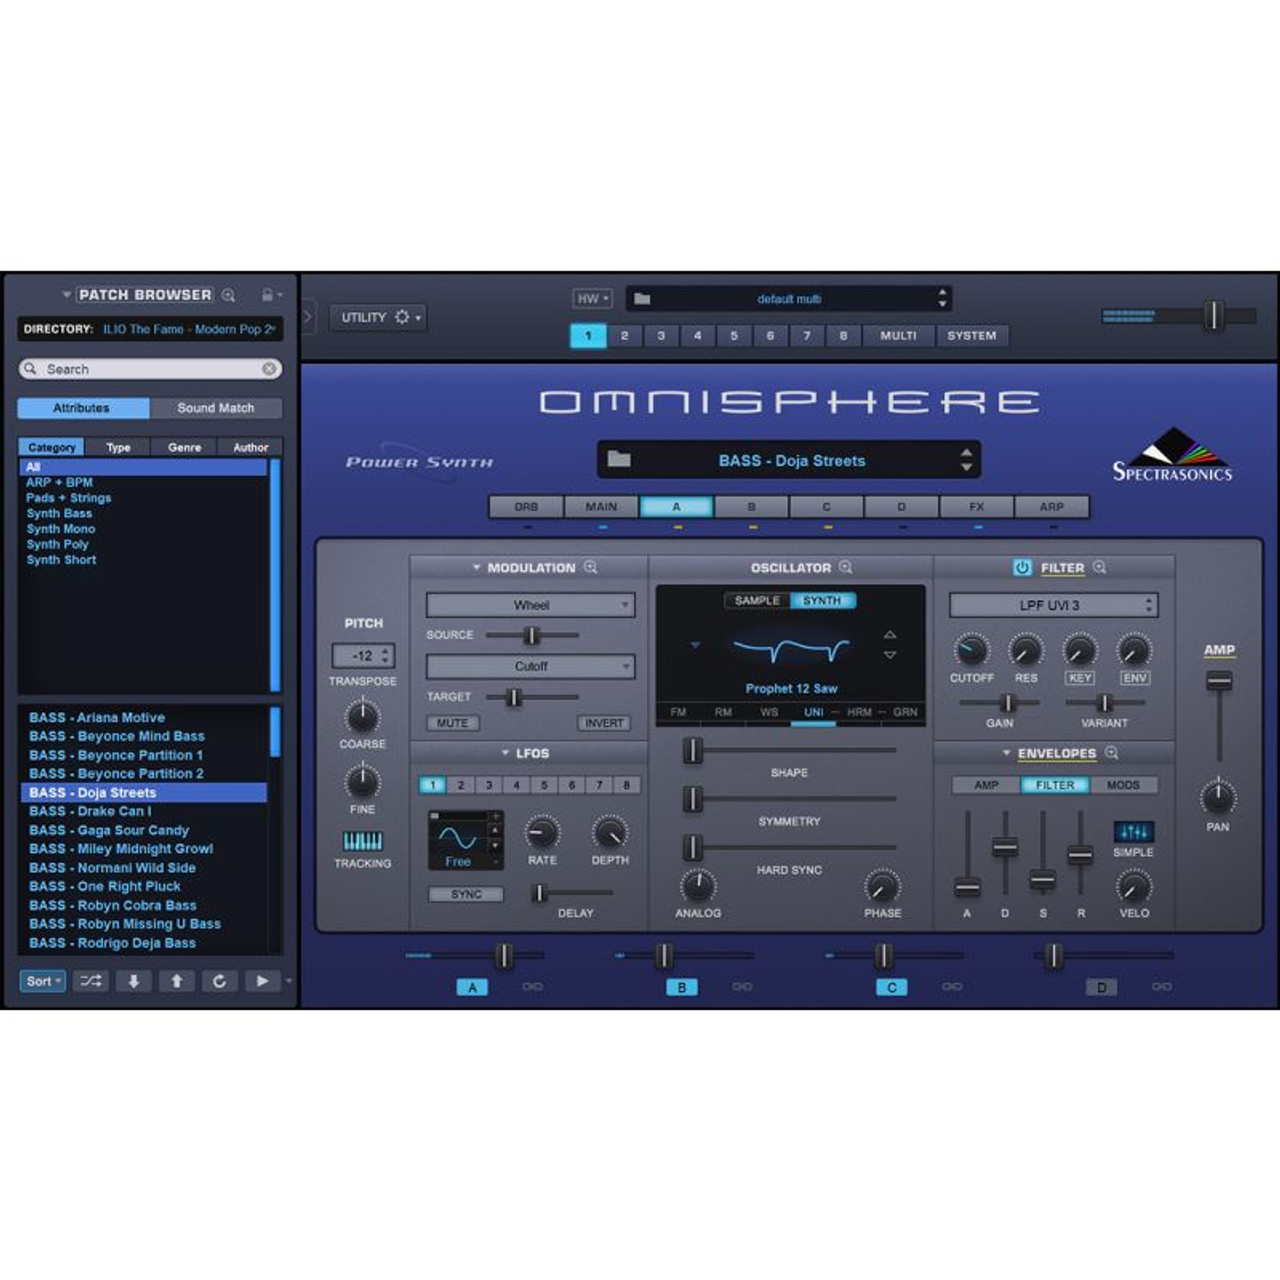 The Fame Series: Modern Pop 2 — Patches for Omnisphere